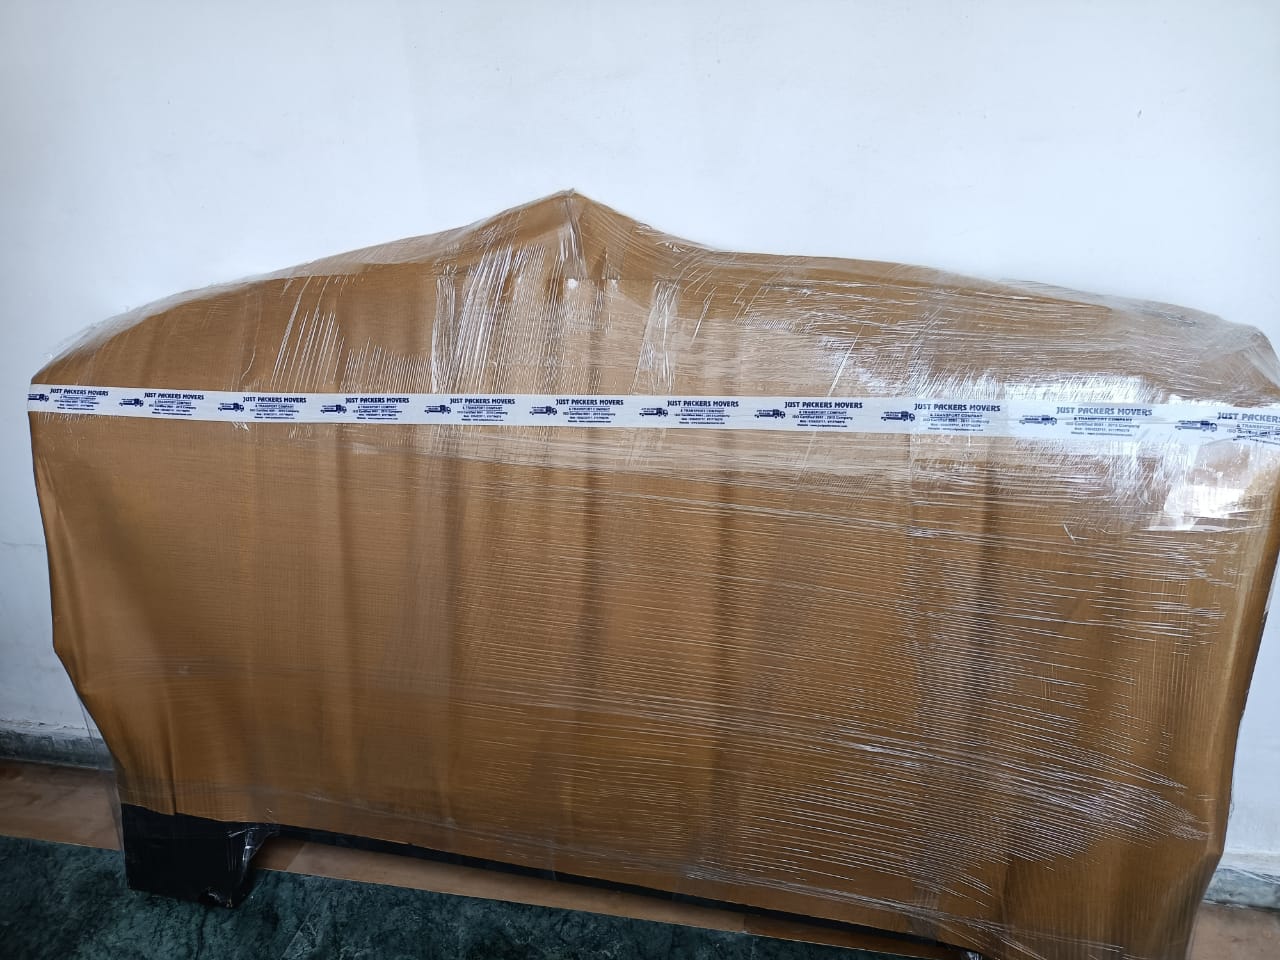 Packers and Movers in Noida Sector 18